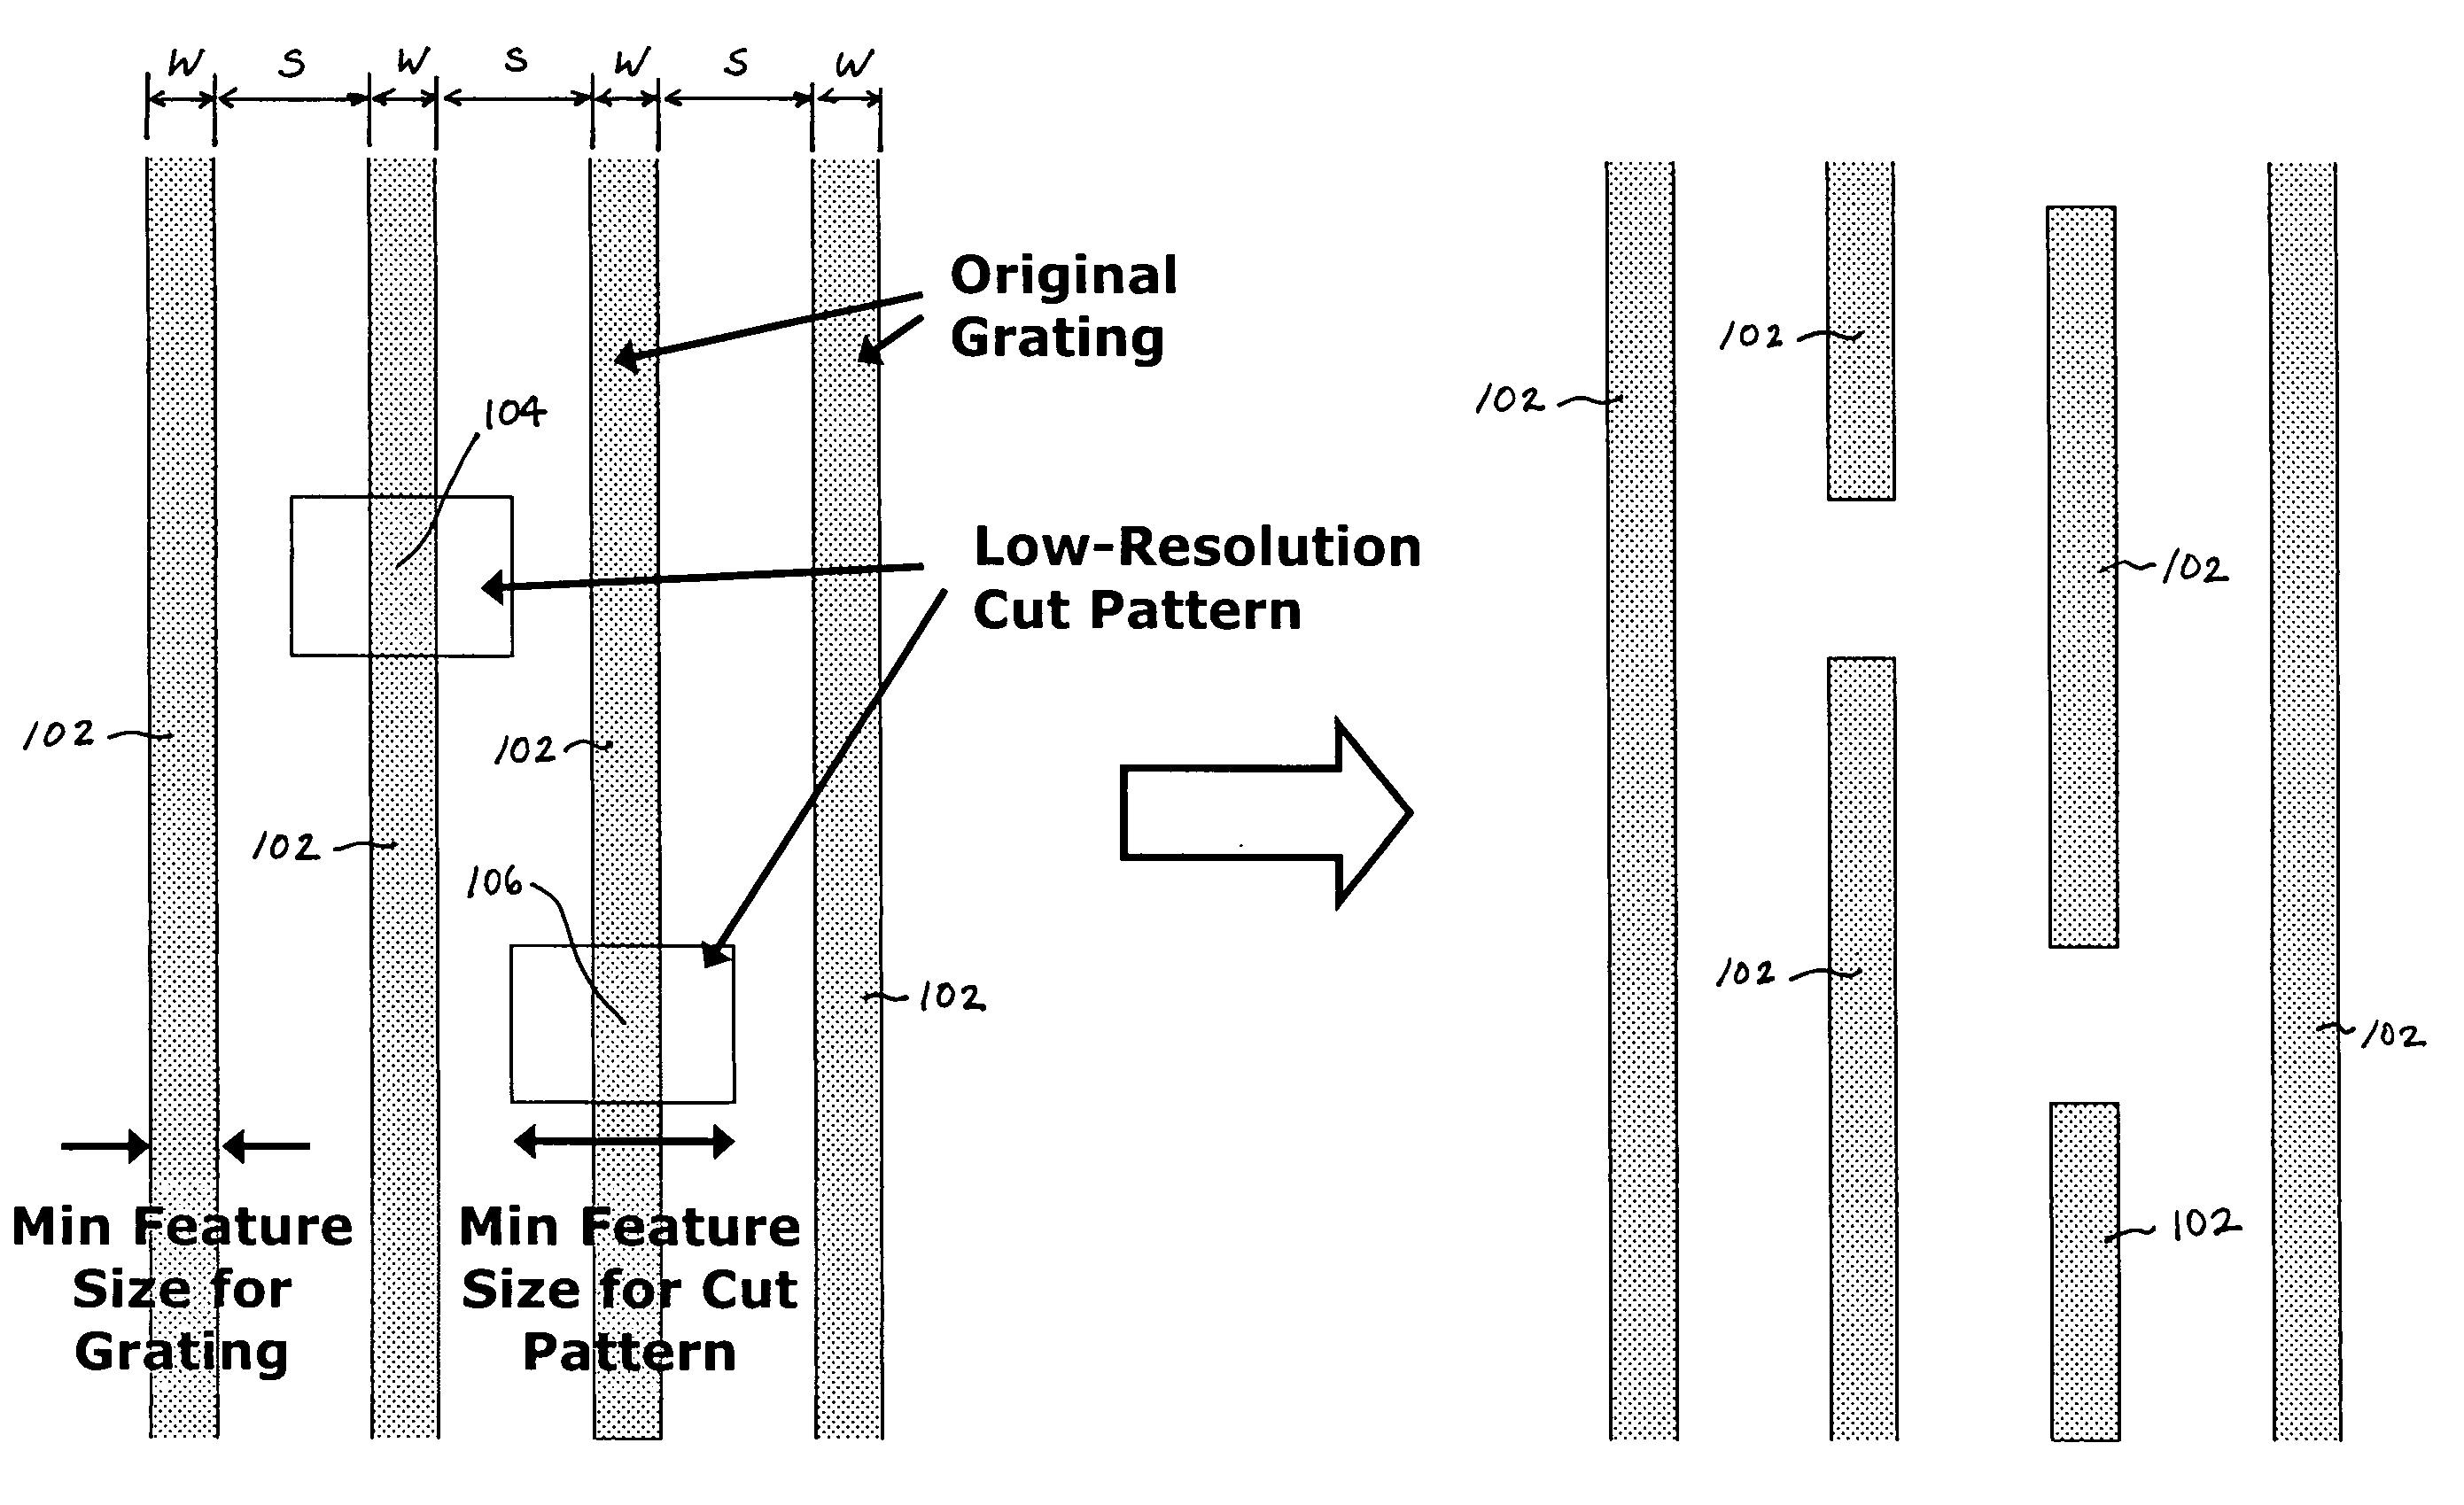 Integrated circuit having gates and active regions forming a regular grating